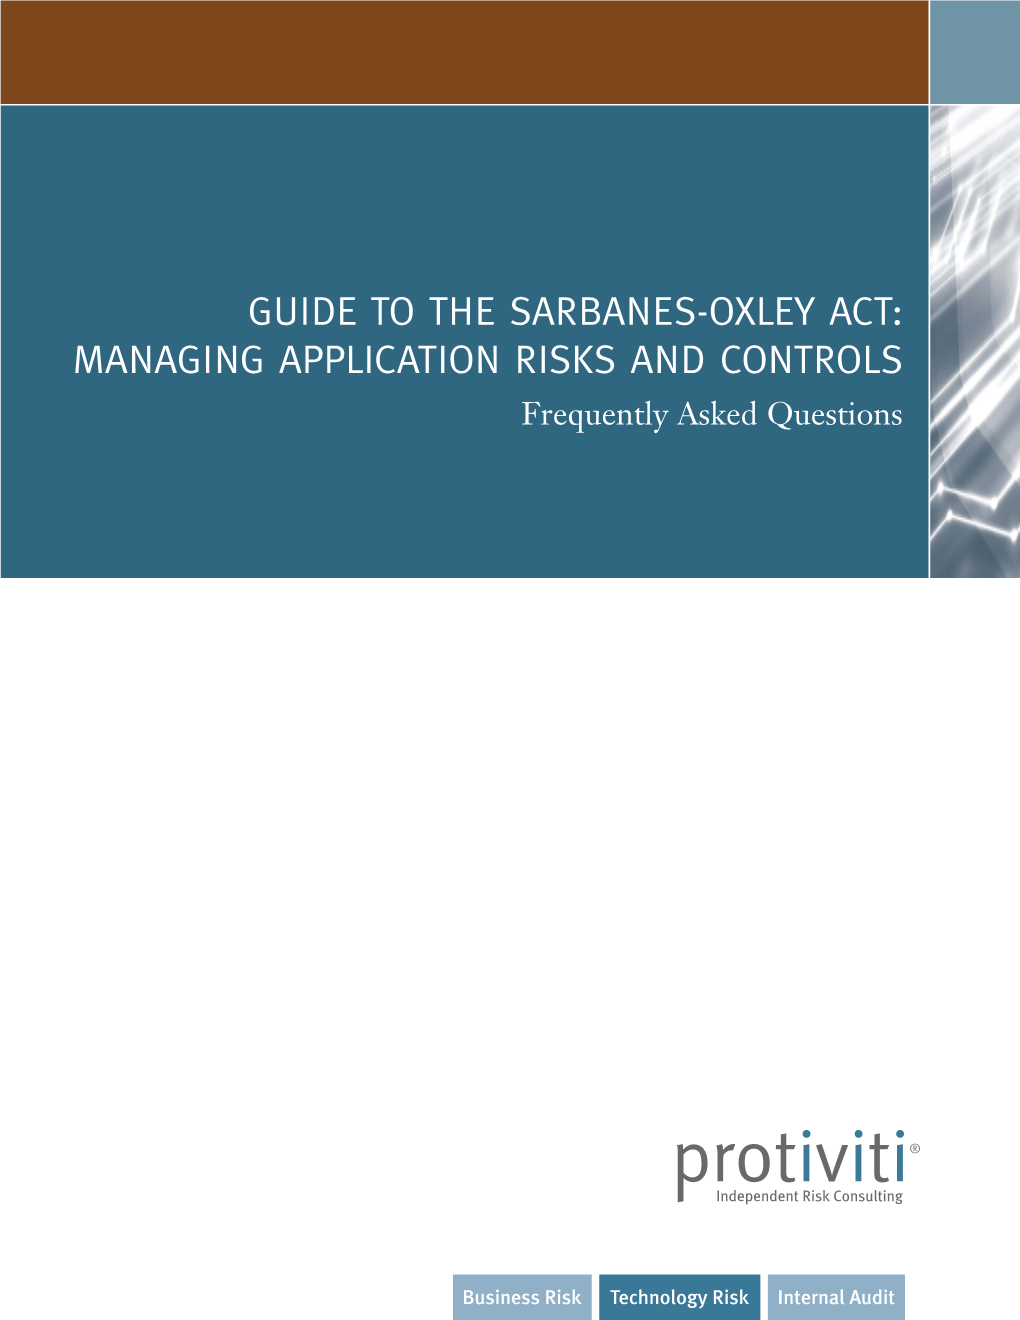 GUIDE to the SARBANES-OXLEY ACT: MANAGING APPLICATION RISKS and CONTROLS Frequently Asked Questions Table of Contents